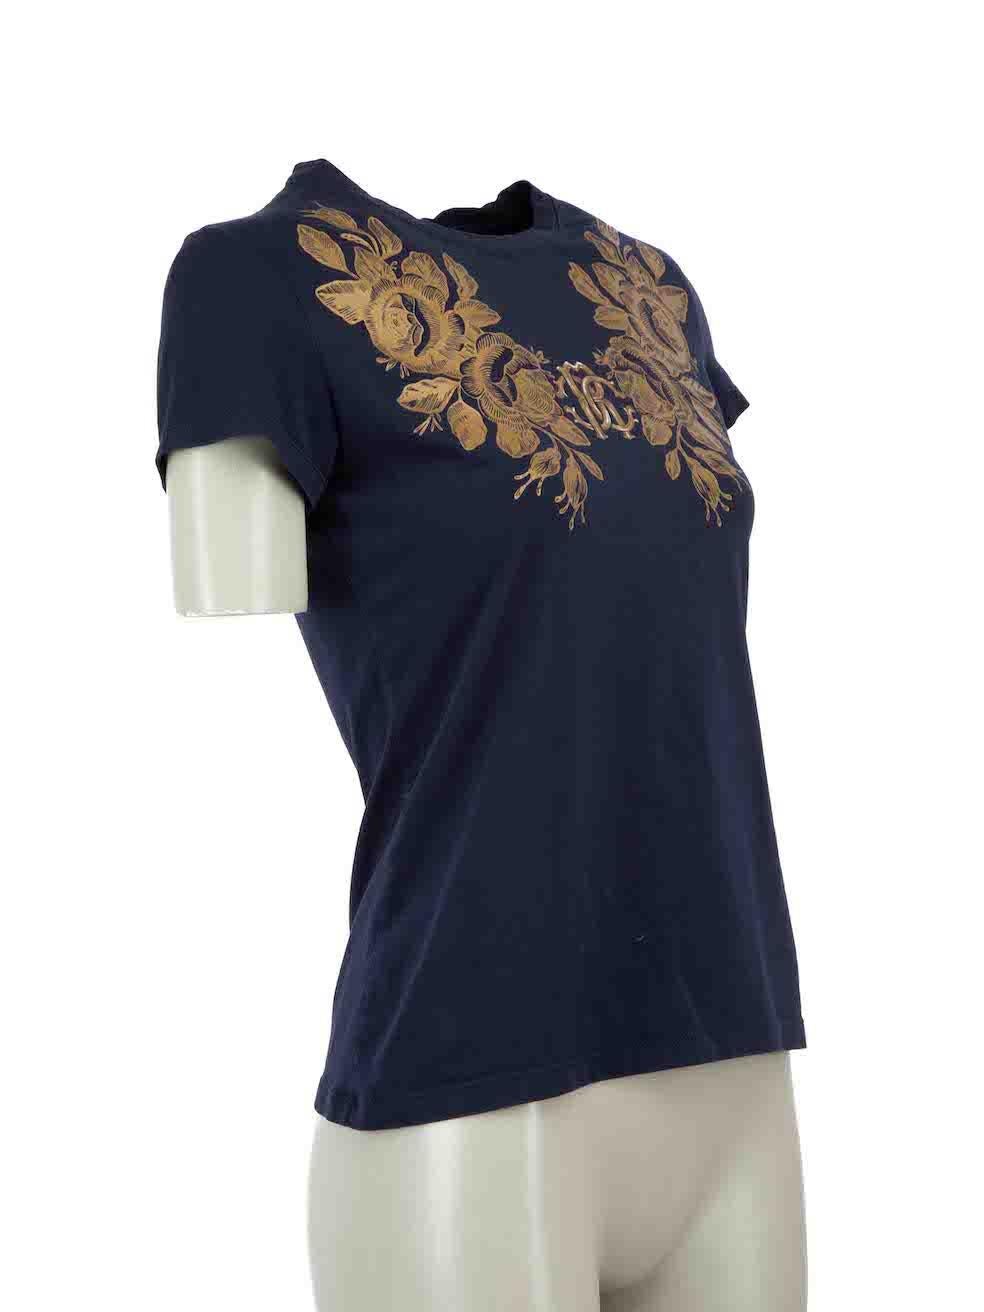 CONDITION is Very good. Hardly any visible wear to top is evident on this used Roberto Cavalli designer resale item.

Details

Navy
Cotton
Short sleeves t-shirt
Round neckline
Gold floral print pattern
Stretchy
Made in Italy 

Composition

95%